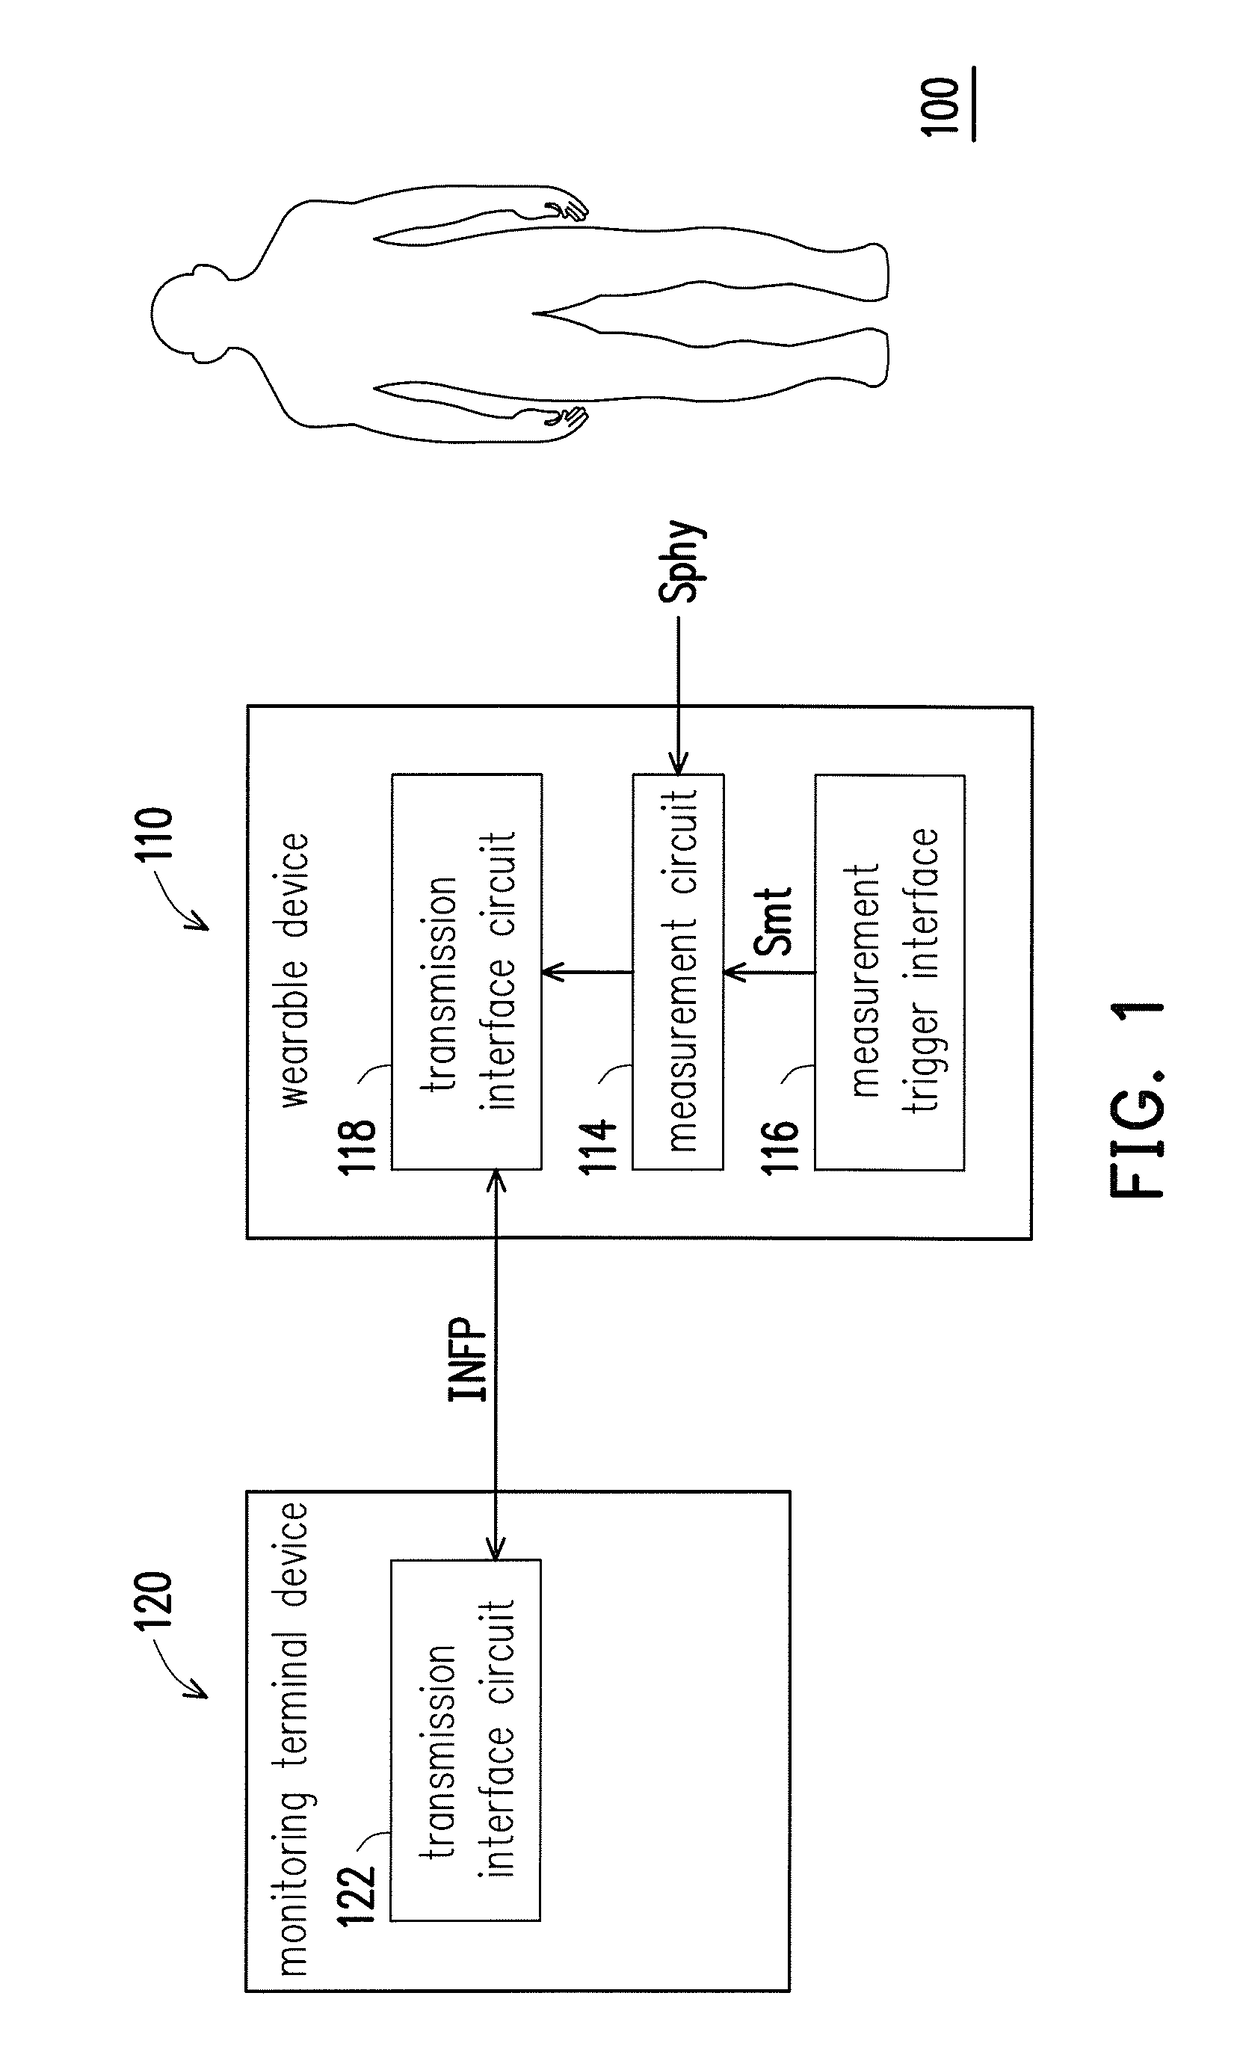 Wearable device and physiological information monitoring system and method